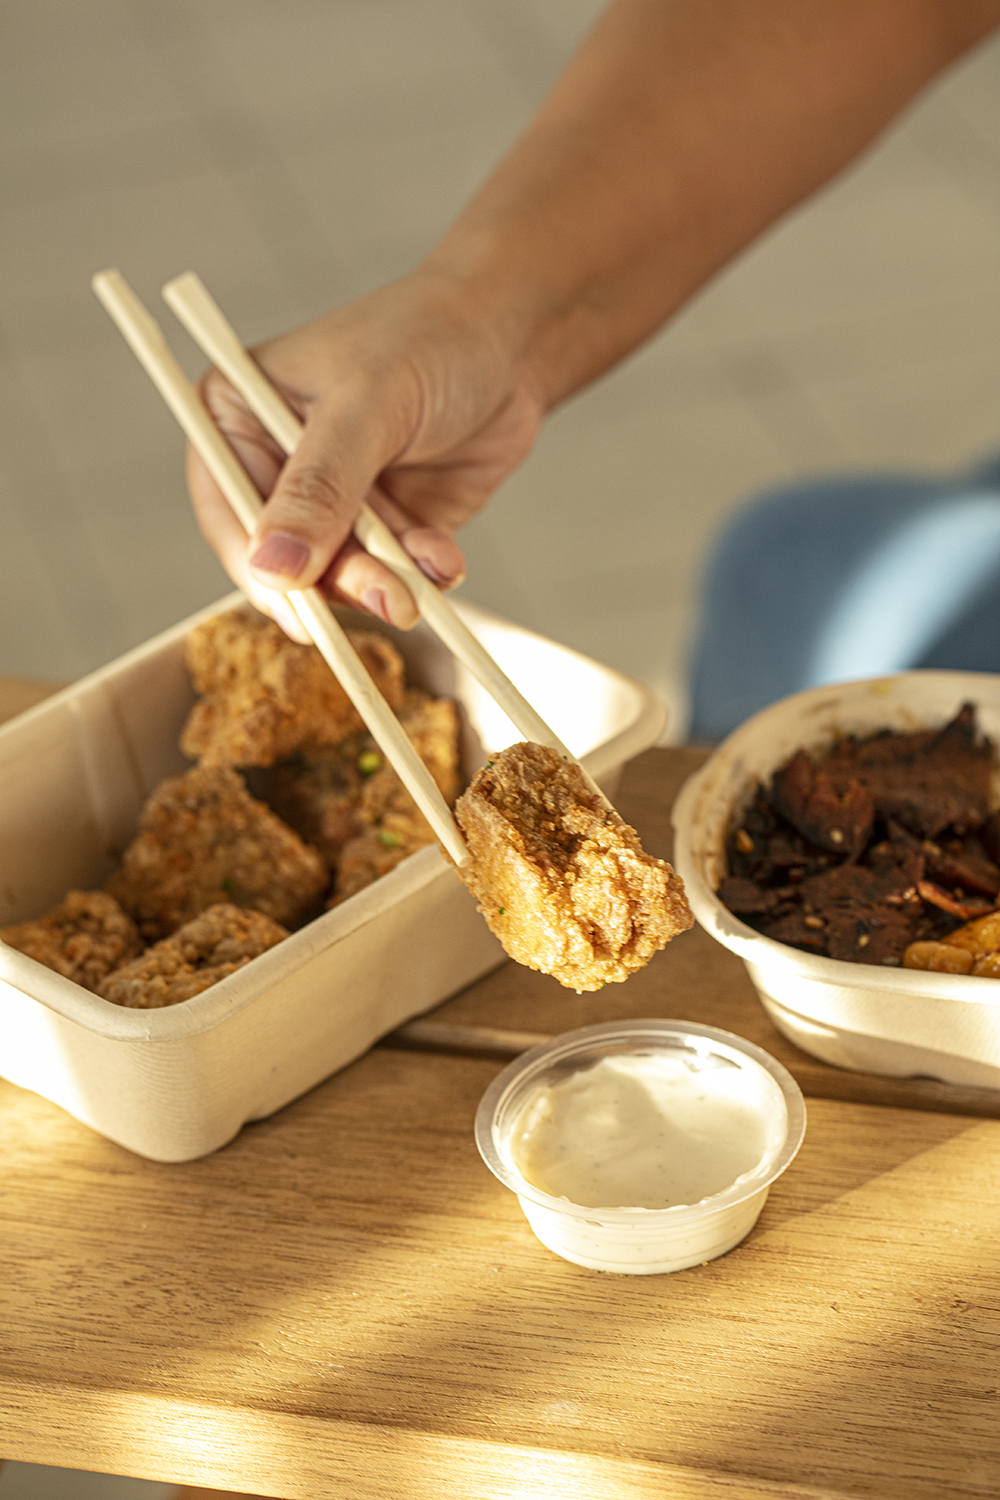 Full of plant-based flavors: Green Bar's chickun wings